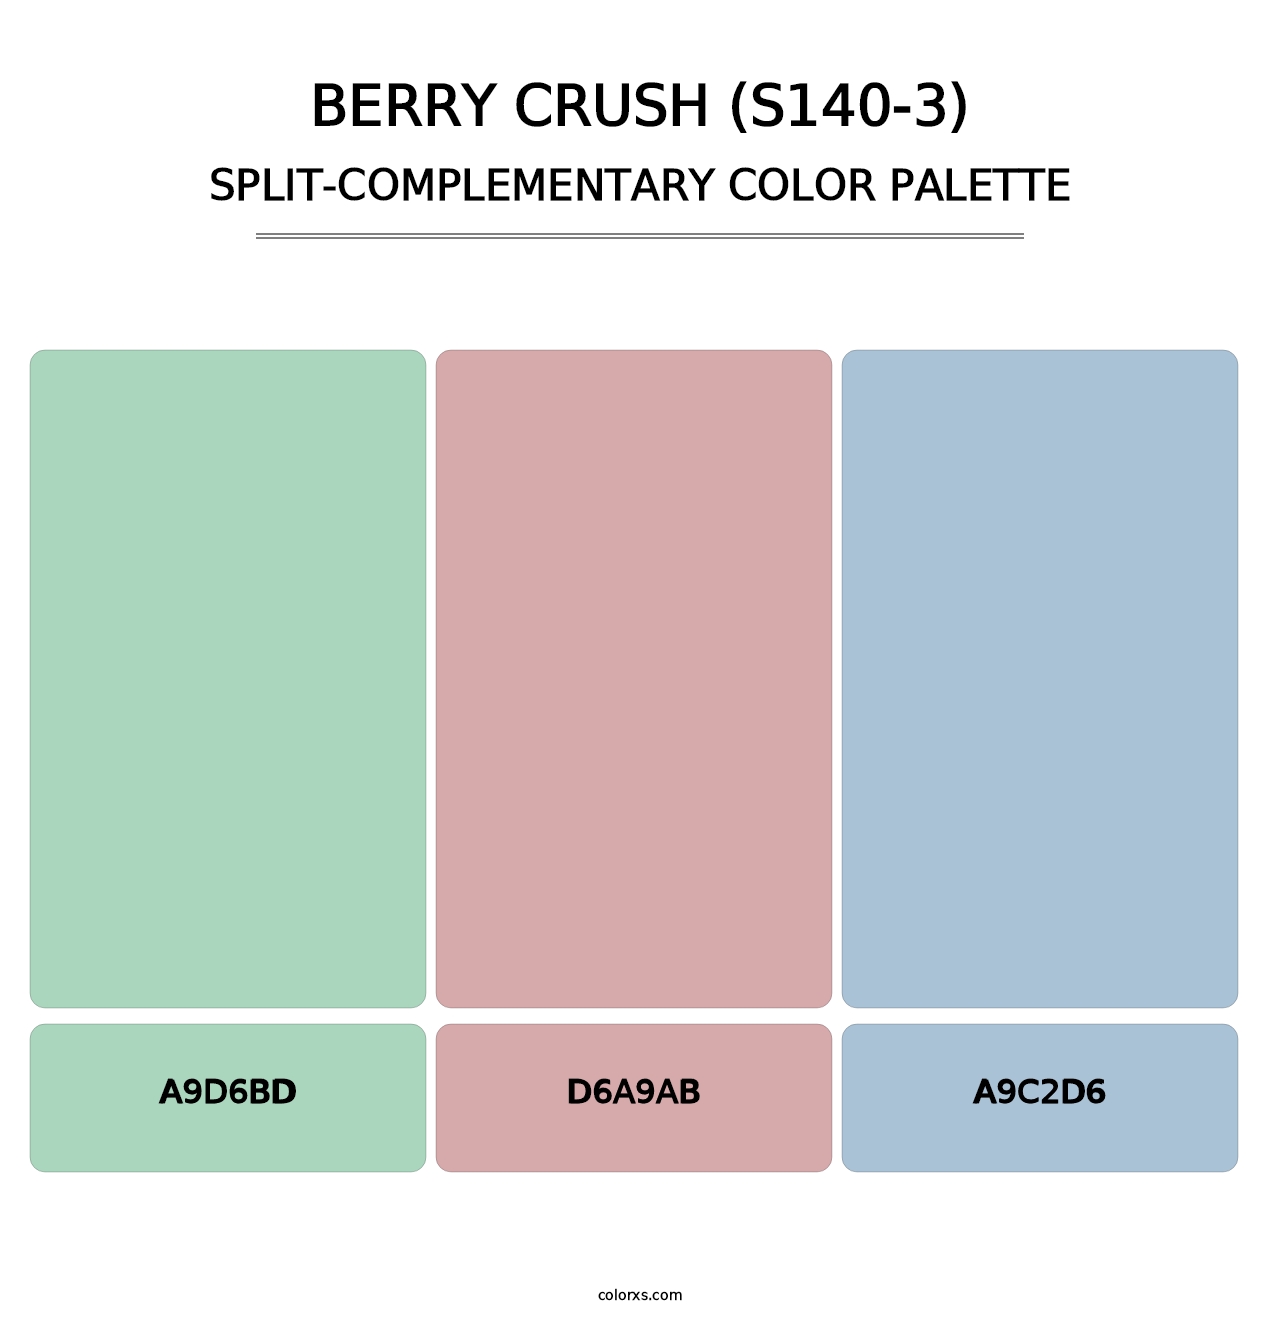 Berry Crush (S140-3) - Split-Complementary Color Palette